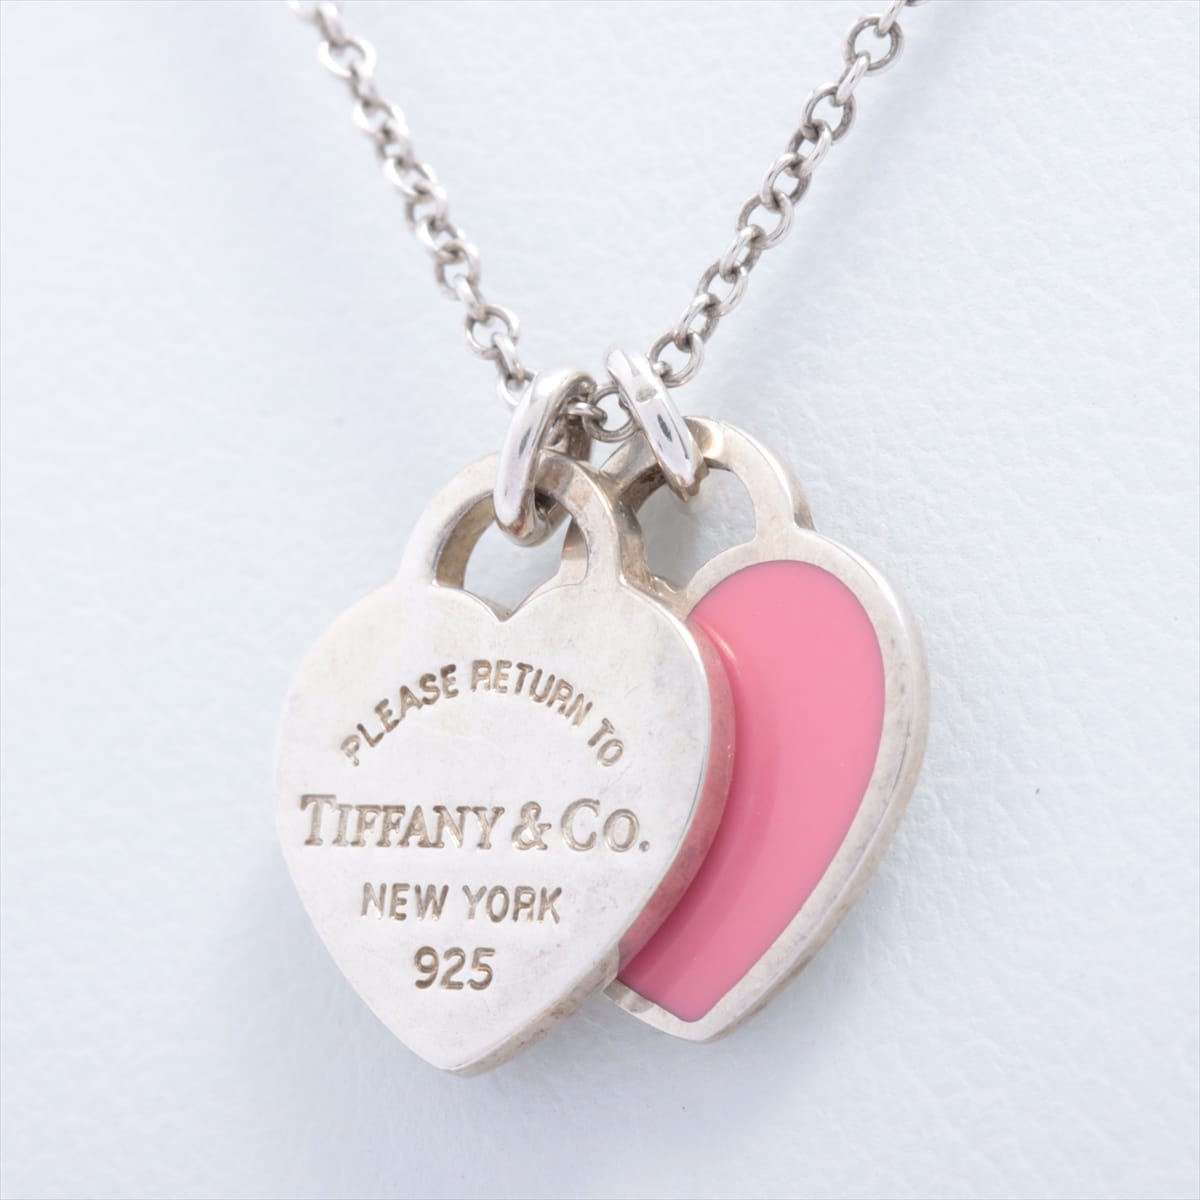 Tiffany Return To Tiffany Mini Double Heart Tag Necklace 925 2.8g Silver×Pink